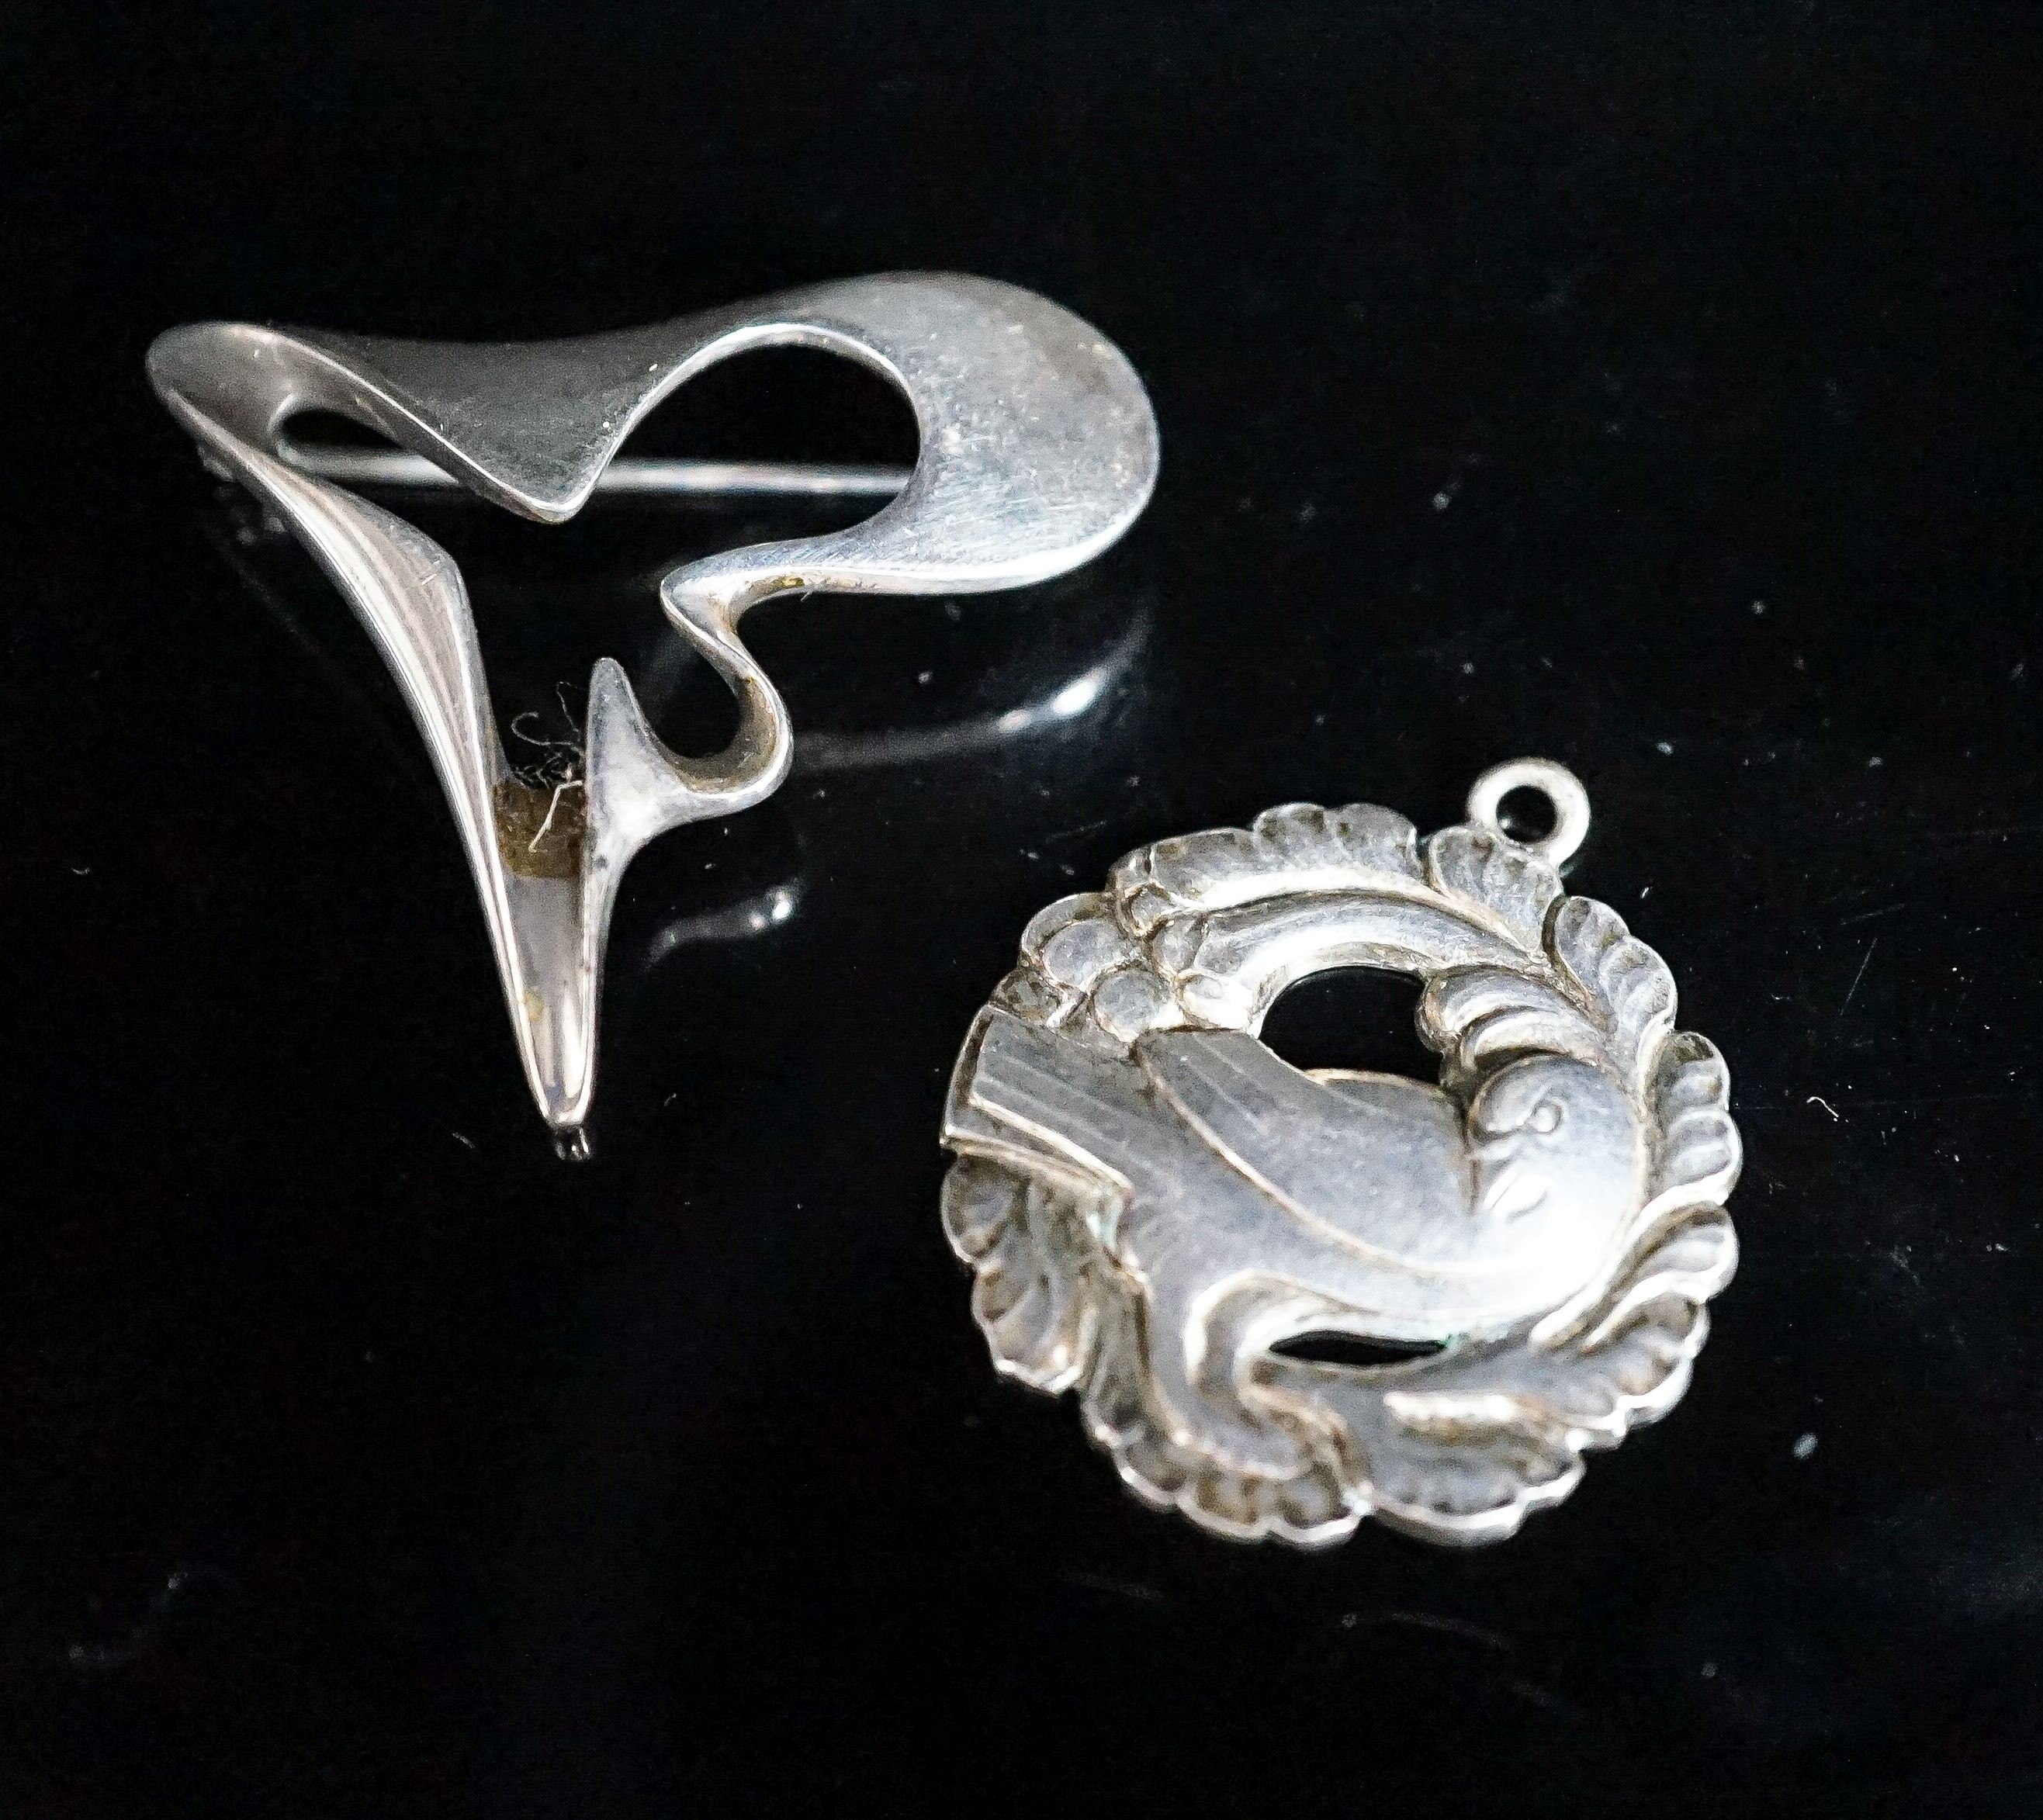 A Georg Jensen sterling abstract brooch, no. 324, 41mm and a Georg Jensen sterling pendant (converted brooch), no. 134.